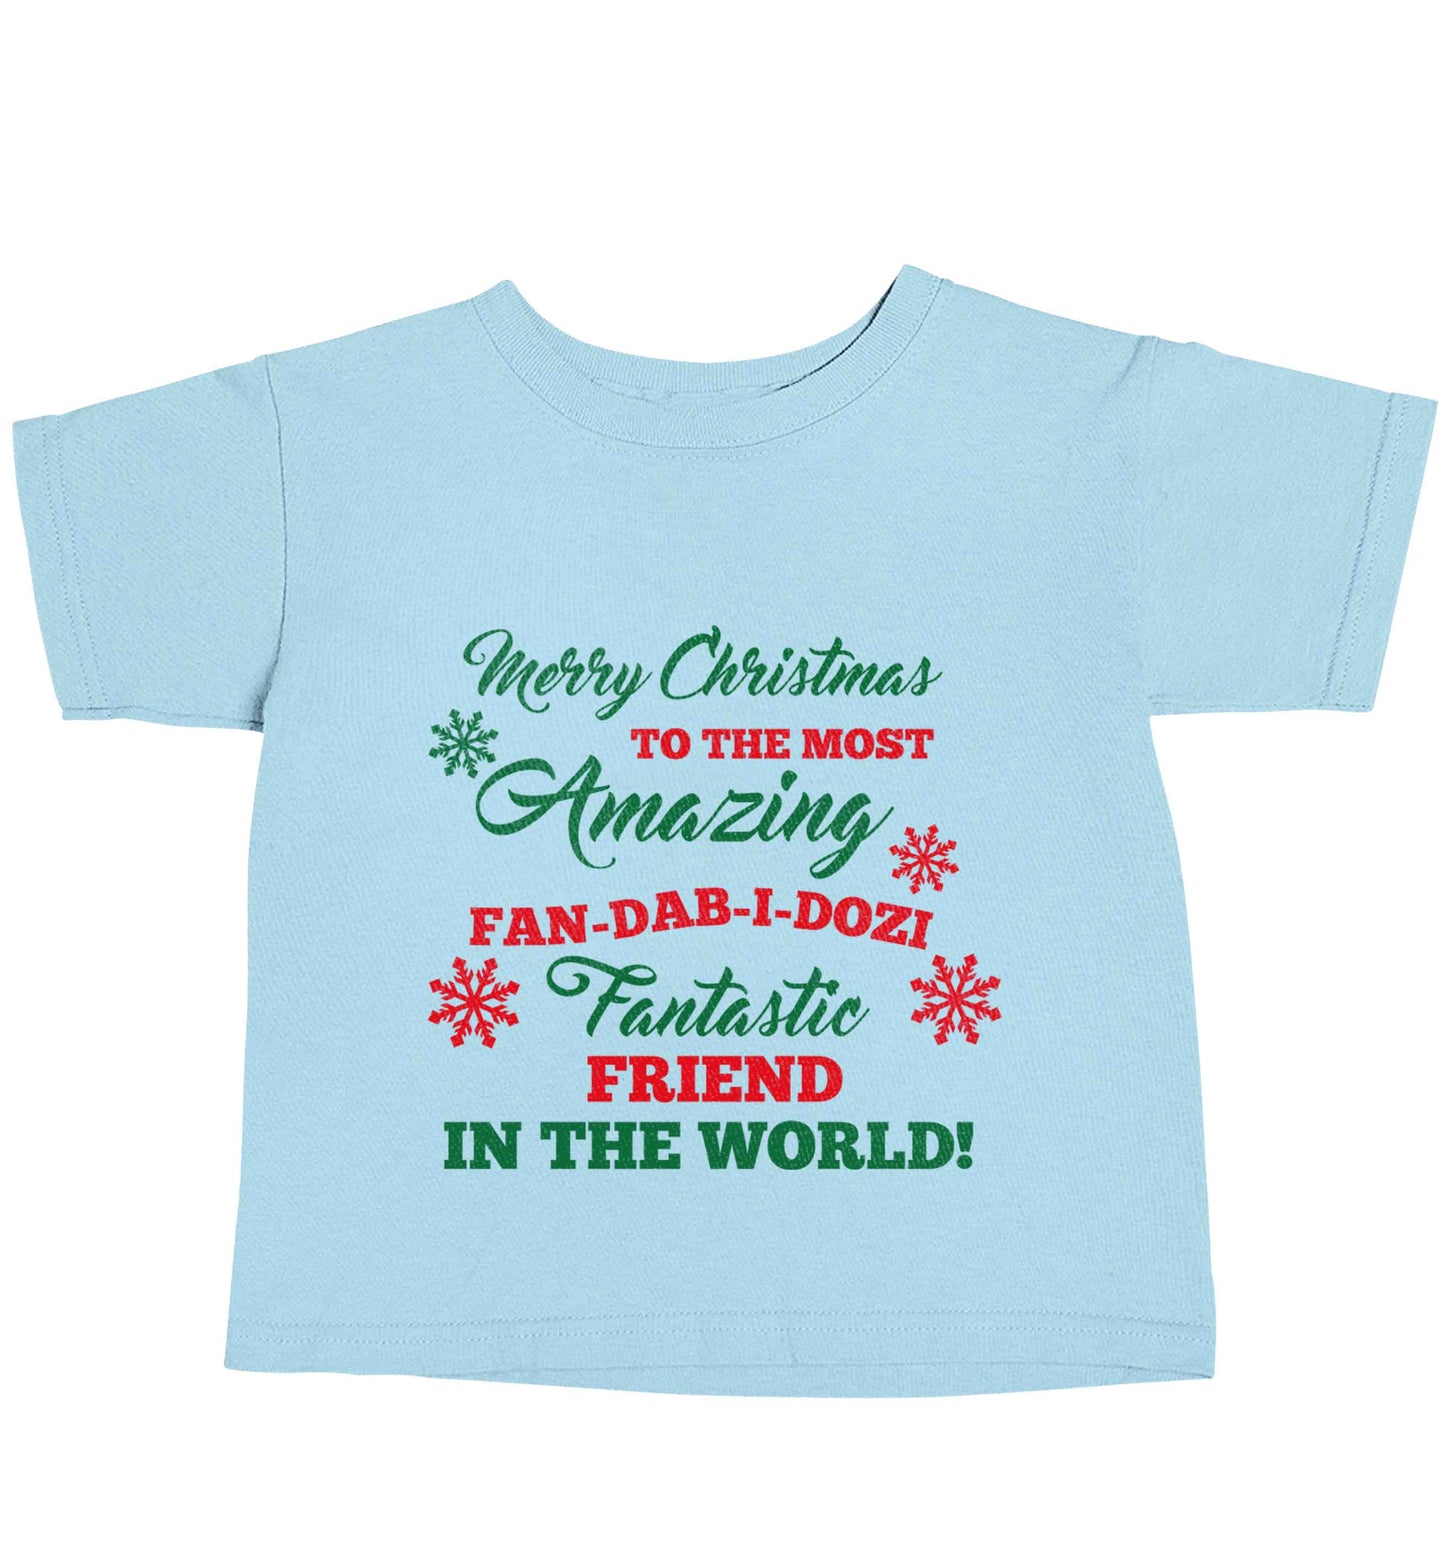 Merry Christmas to the most amazing fan-dab-i-dozi fantasic friend in the world light blue baby toddler Tshirt 2 Years